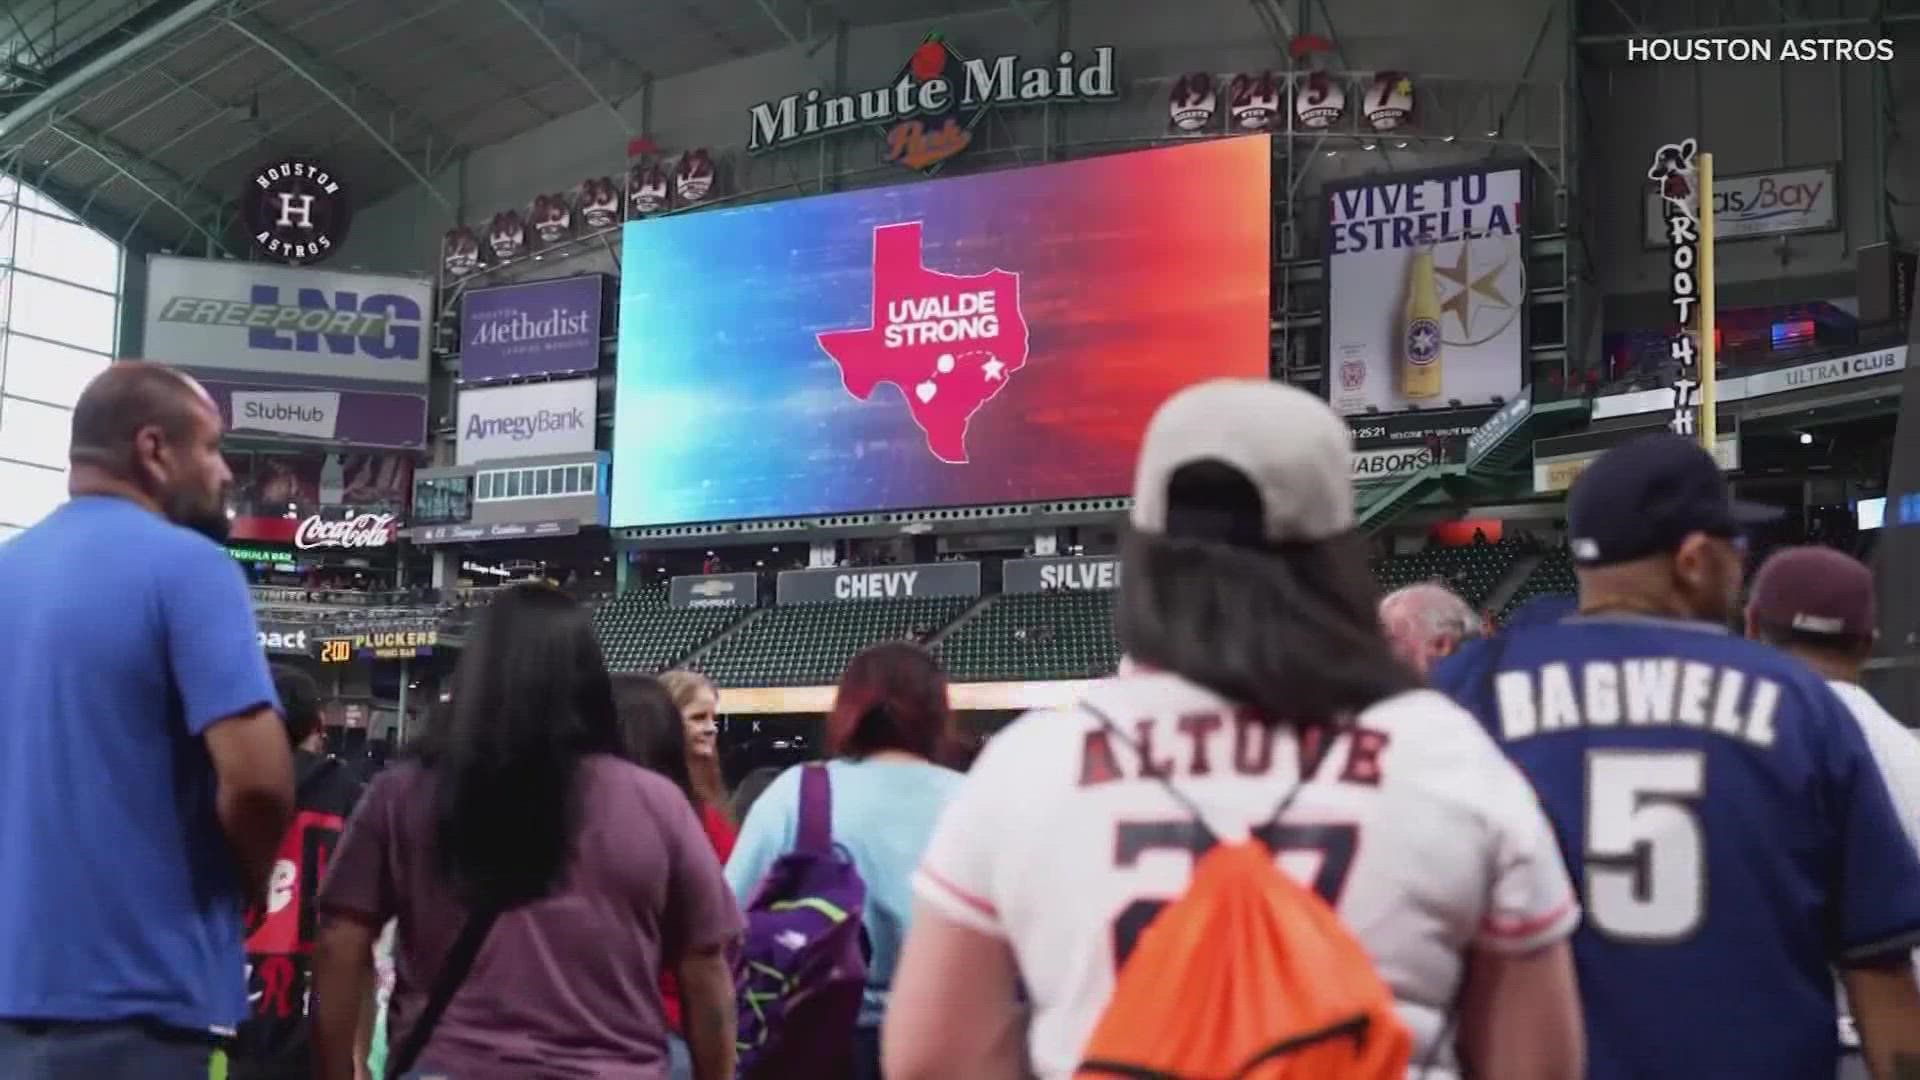 The Astros welcomed ten busses full of Uvalde residents, along with thousands of others from the southwest Texas town.